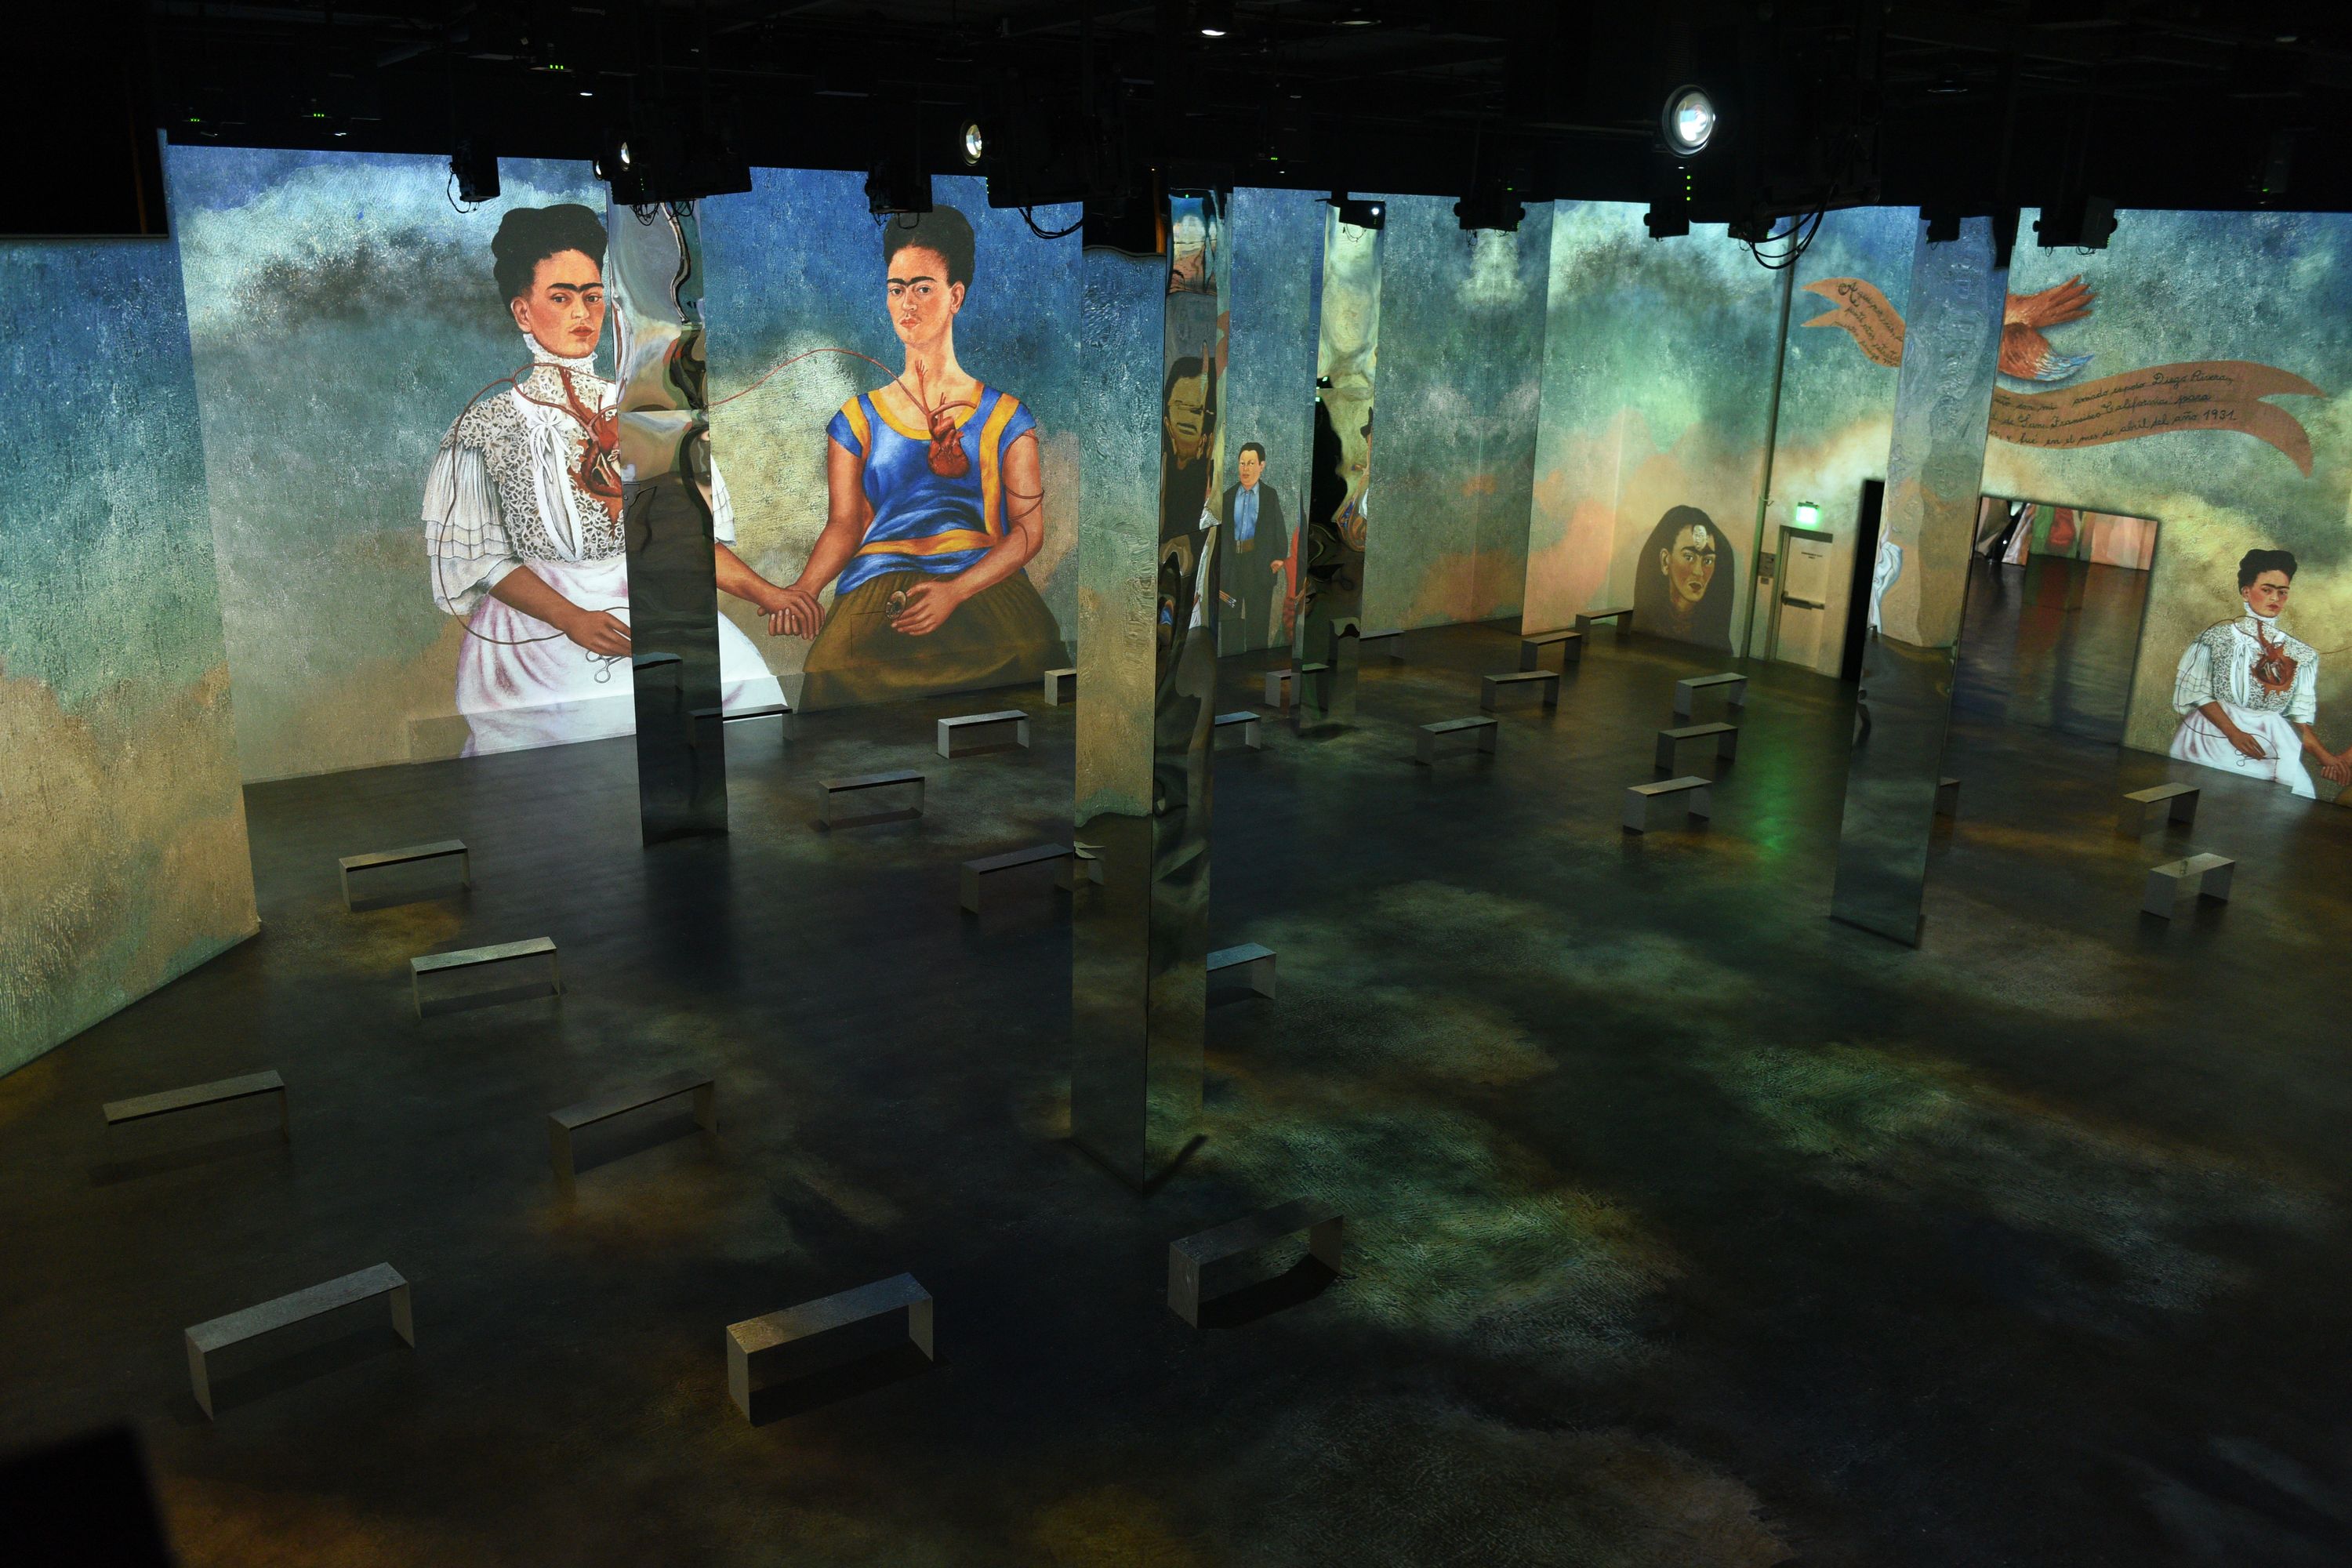 LOS ANGELES, CALIFORNIA - MARCH 30: Lighthouse Artspace Los Angeles - Immersive Frida Kahlo Preview on March 30, 2022 in Los Angeles, California. (Photo by Vivien Killilea/Getty Images for Lighthouse Immersive and Impact Museums)